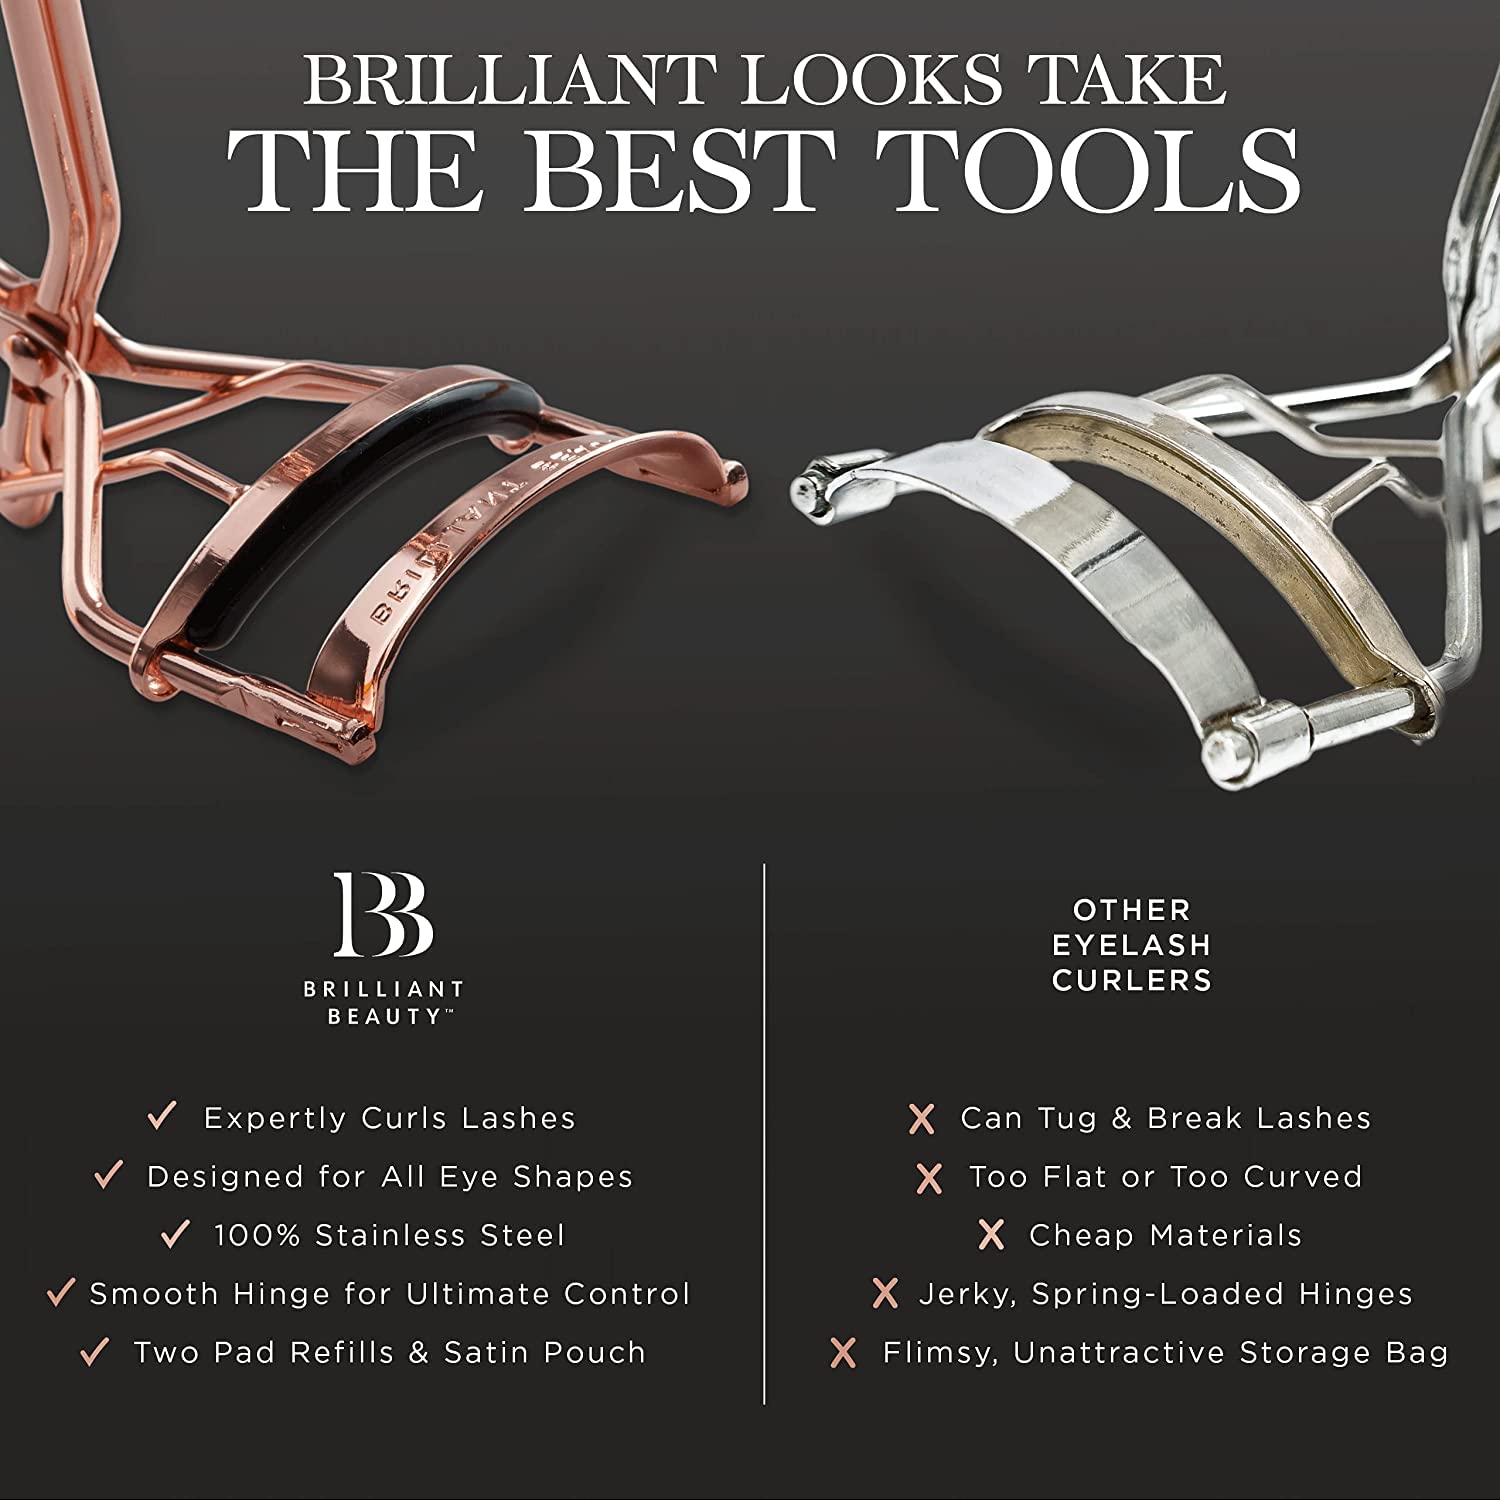 Brilliant Beauty Eyelash Curler with Satin Bag & Refill Pads - Award Winning - No Pinching, Just Dramatically Curled Eyelashes for a Lash Lift in Seconds (Rose Gold)